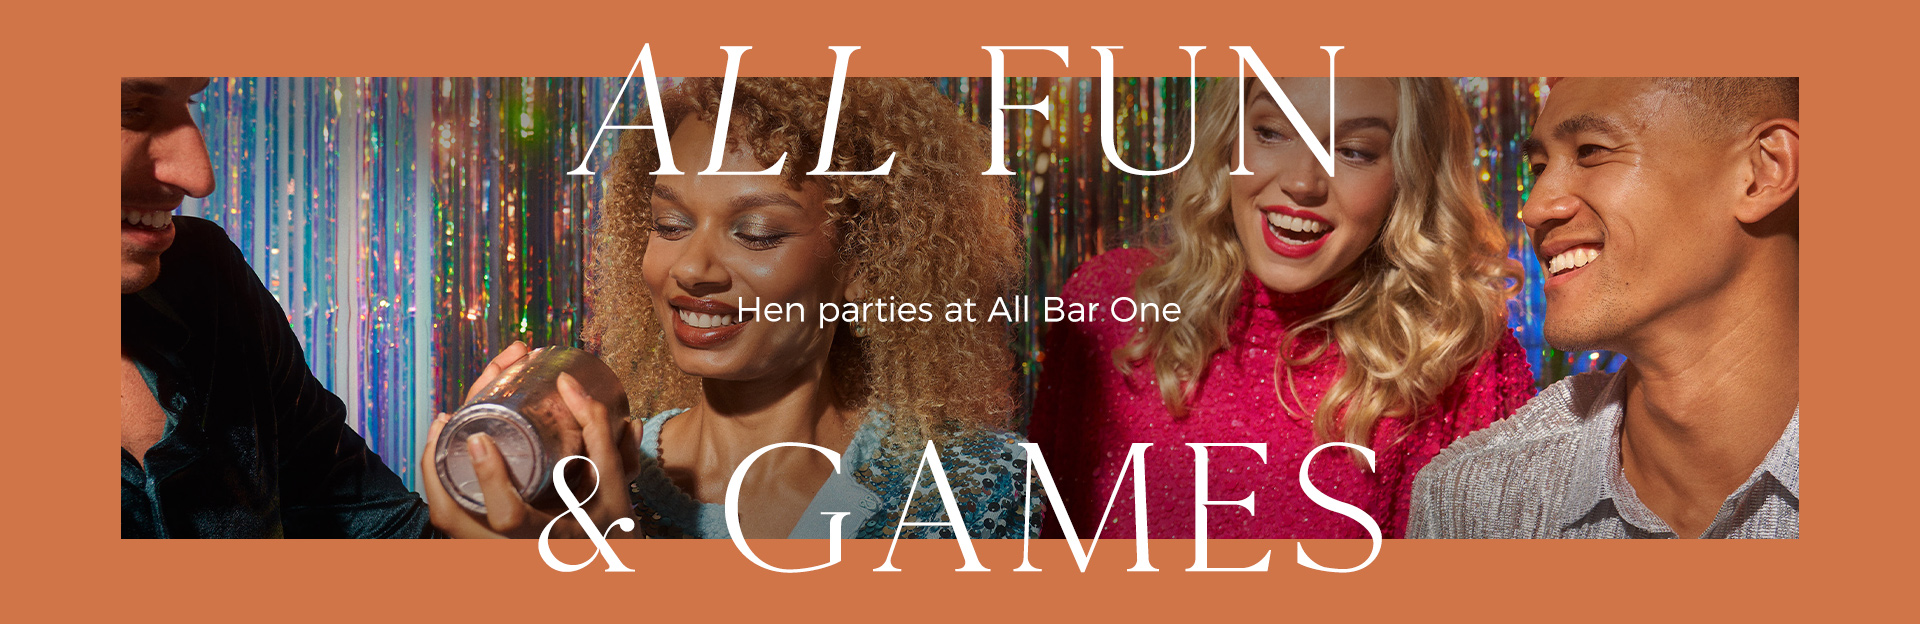 Hen parties at All Bar One Houndsditch